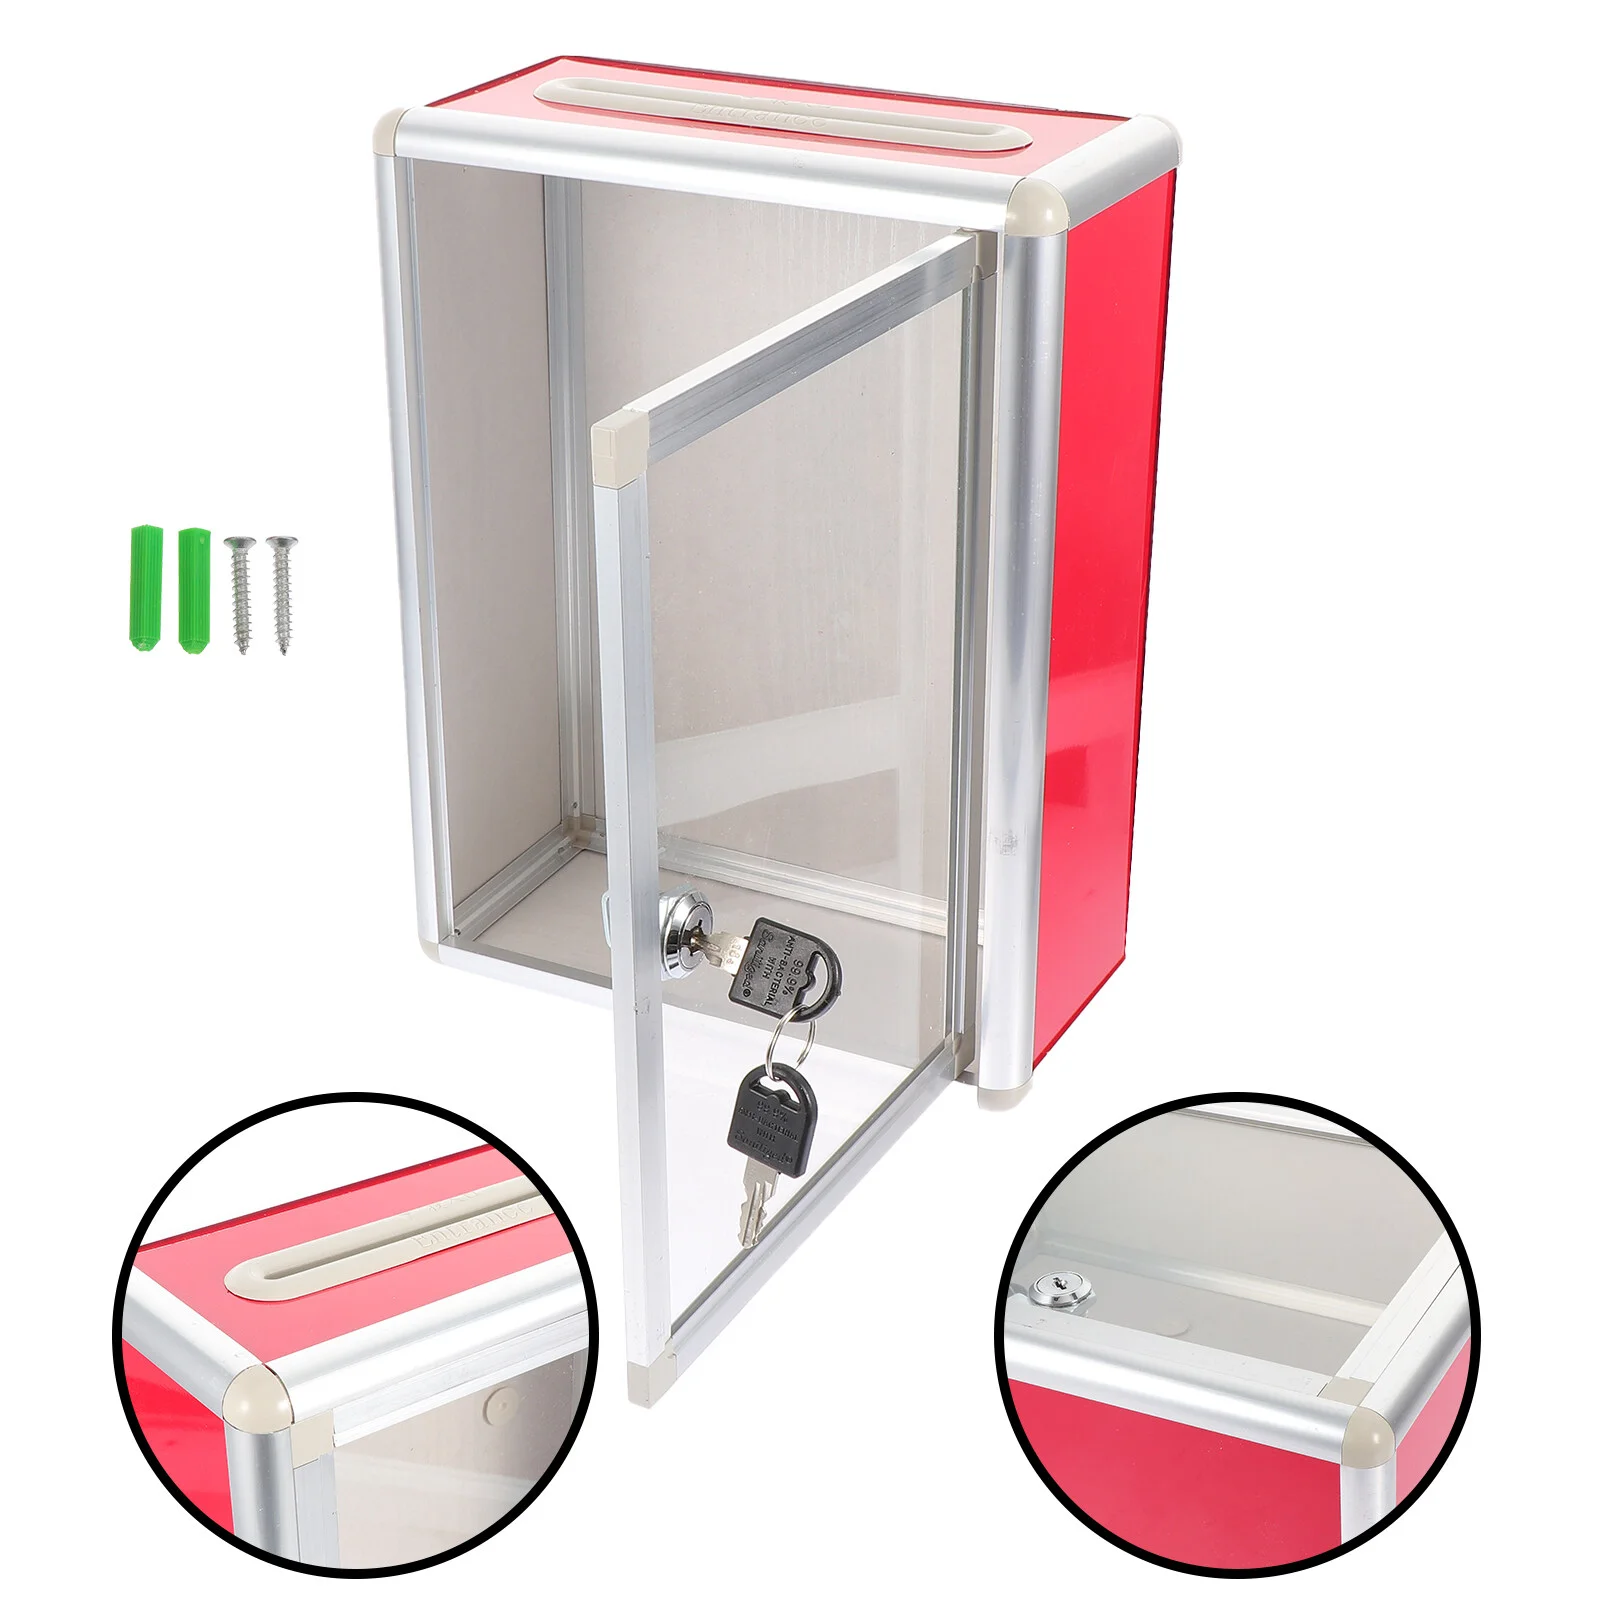 

Suggestion Box Mail Storage Aluminum Letterbox Cards Post Container Complaint Wall Mount Mailboxes